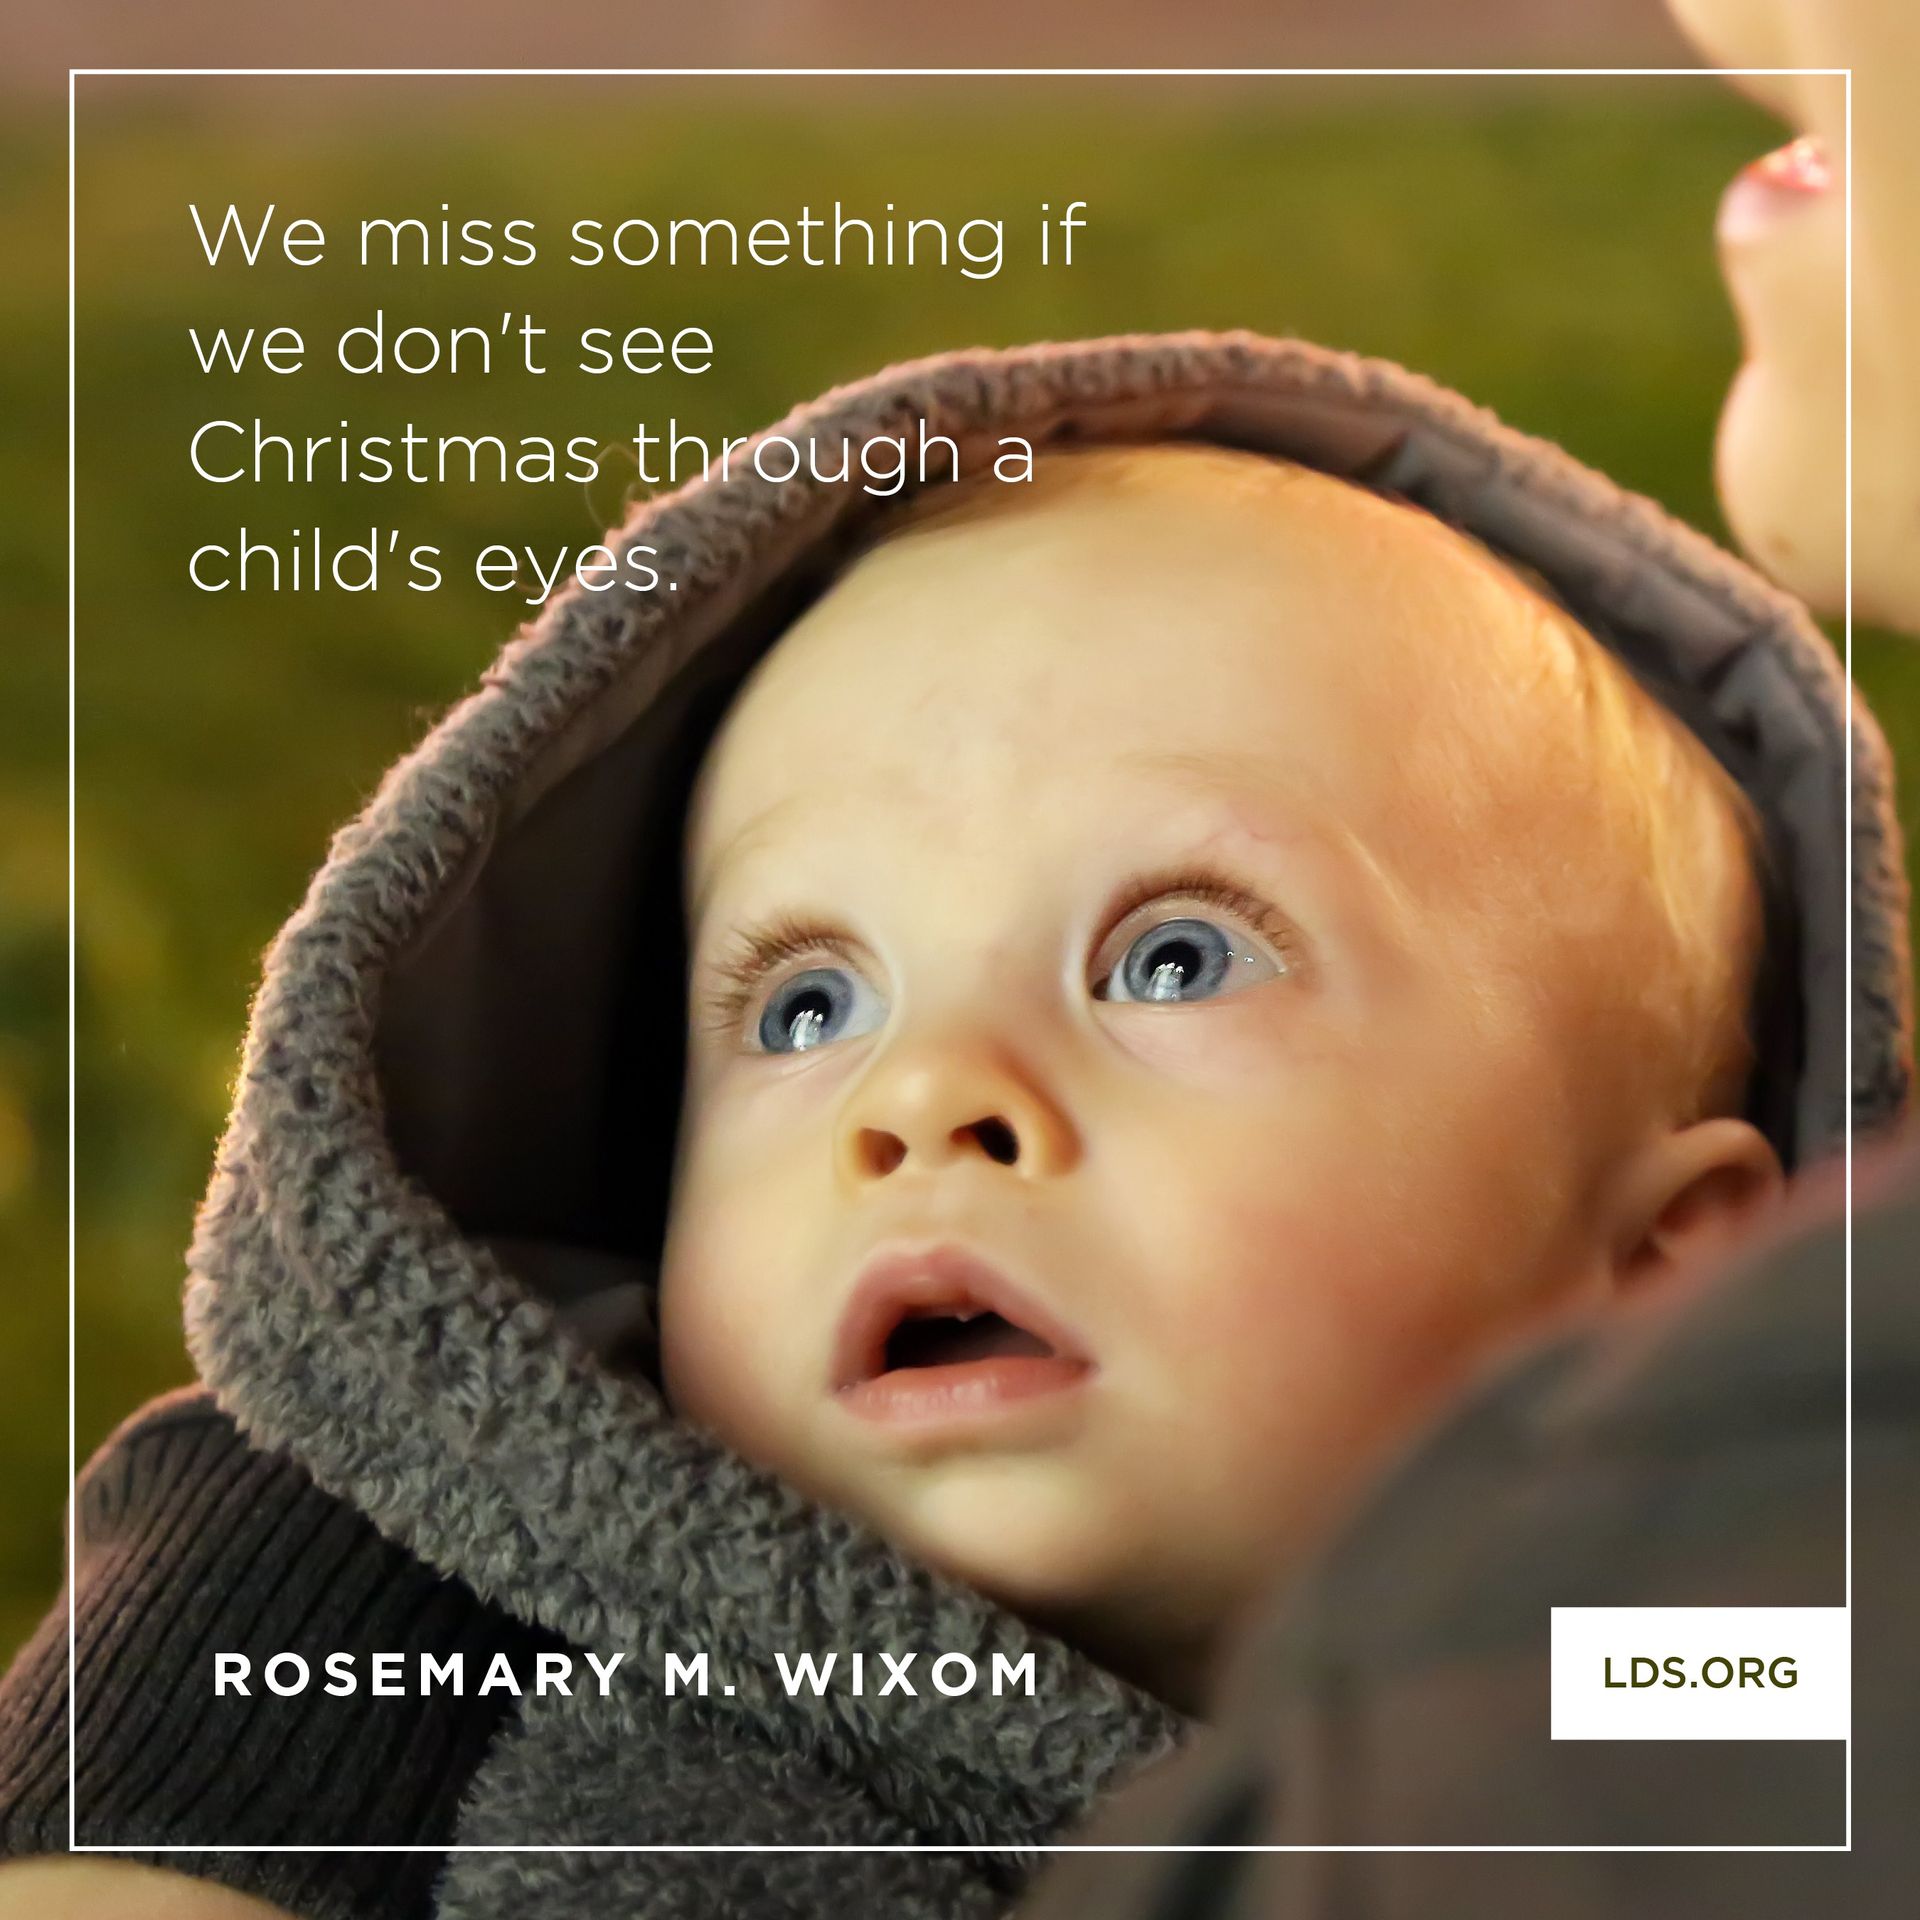 “We miss something if we don't see Christmas through a child’s eyes.”—Sister Rosemary M. Wixom, “What Happened Next?” © undefined ipCode 1.